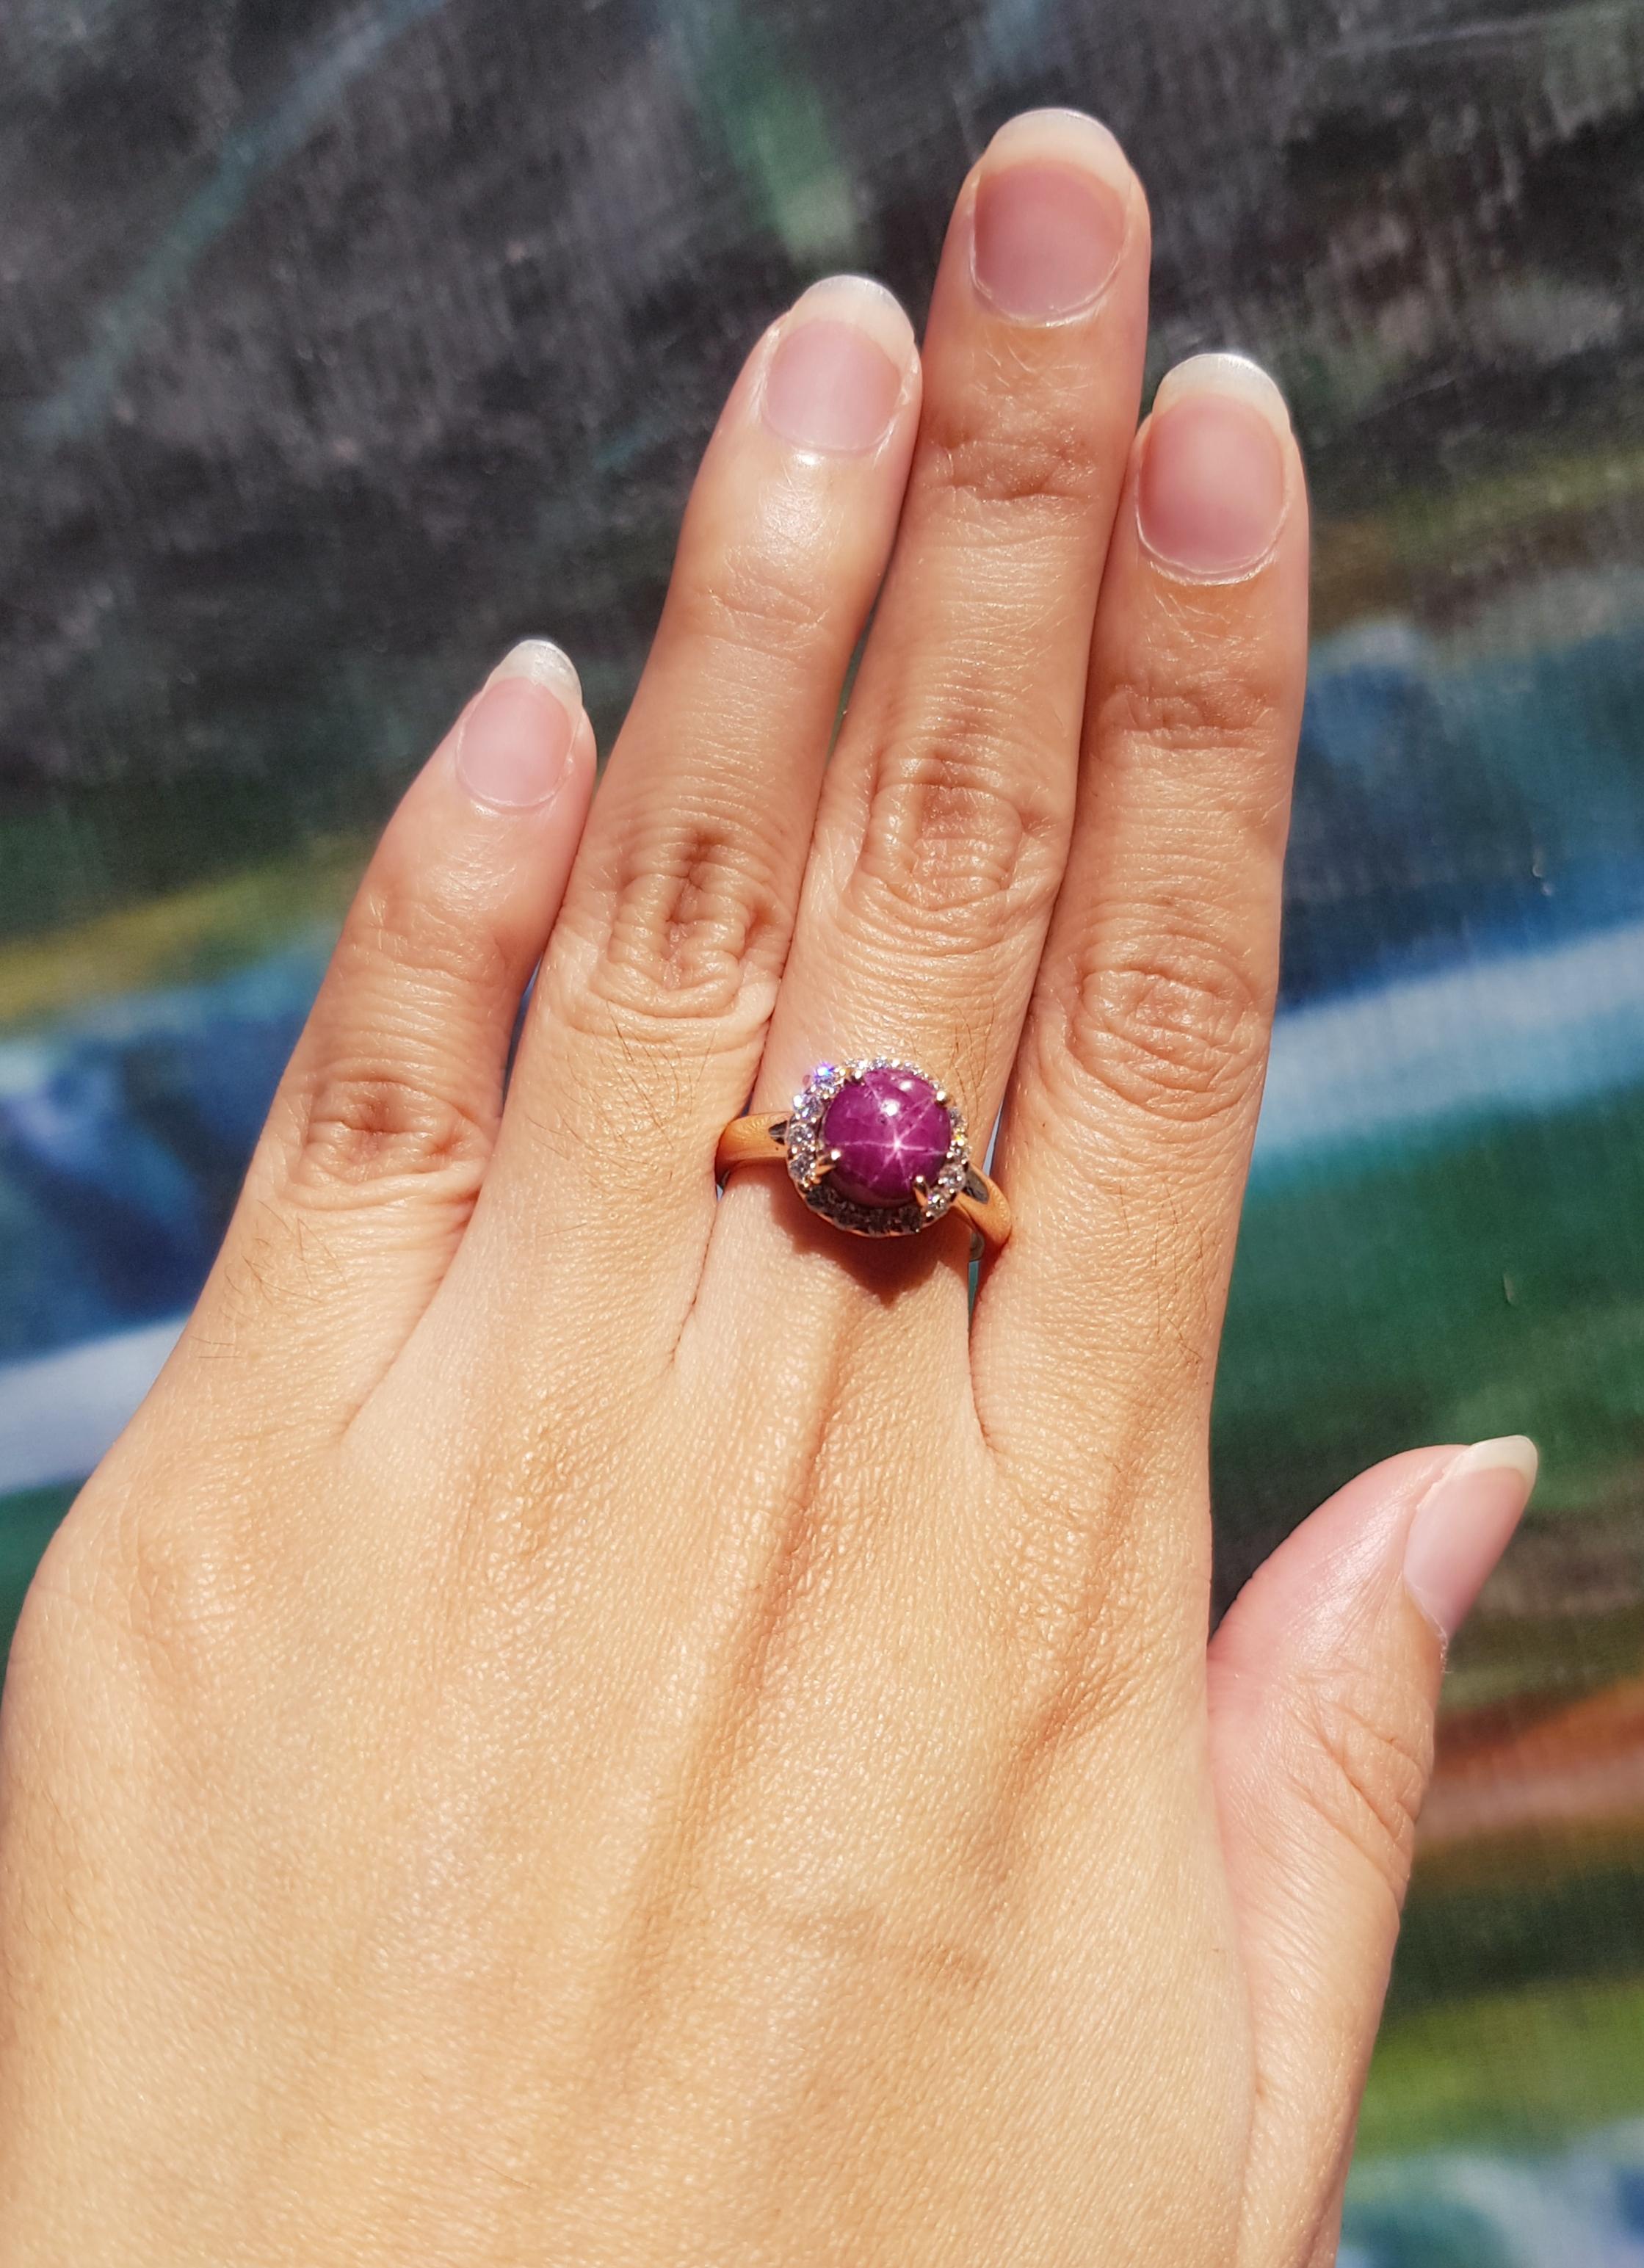 Star Ruby 5.0 carats with Diamond 0.32 carat Ring set in 18 Karat Rose Gold Settings

Width:  1.1 cm 
Length: 1.1 cm
Ring Size: 53
Total Weight: 5.5 grams

